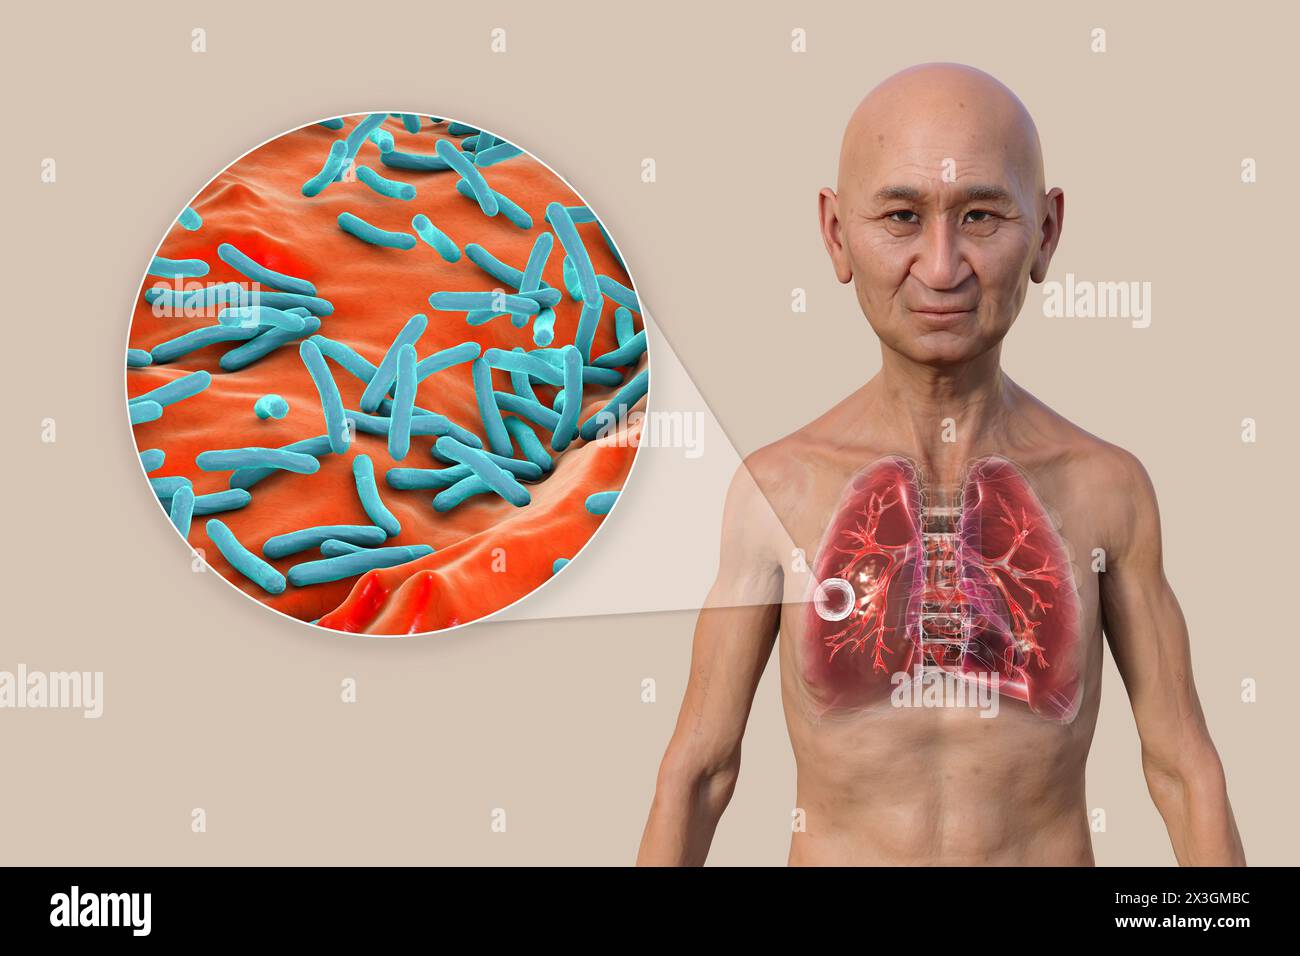 Illustration of a man with lungs affected by cavernous tuberculosis, and close-up view of Mycobacterium tuberculosis bacteria. Stock Photo